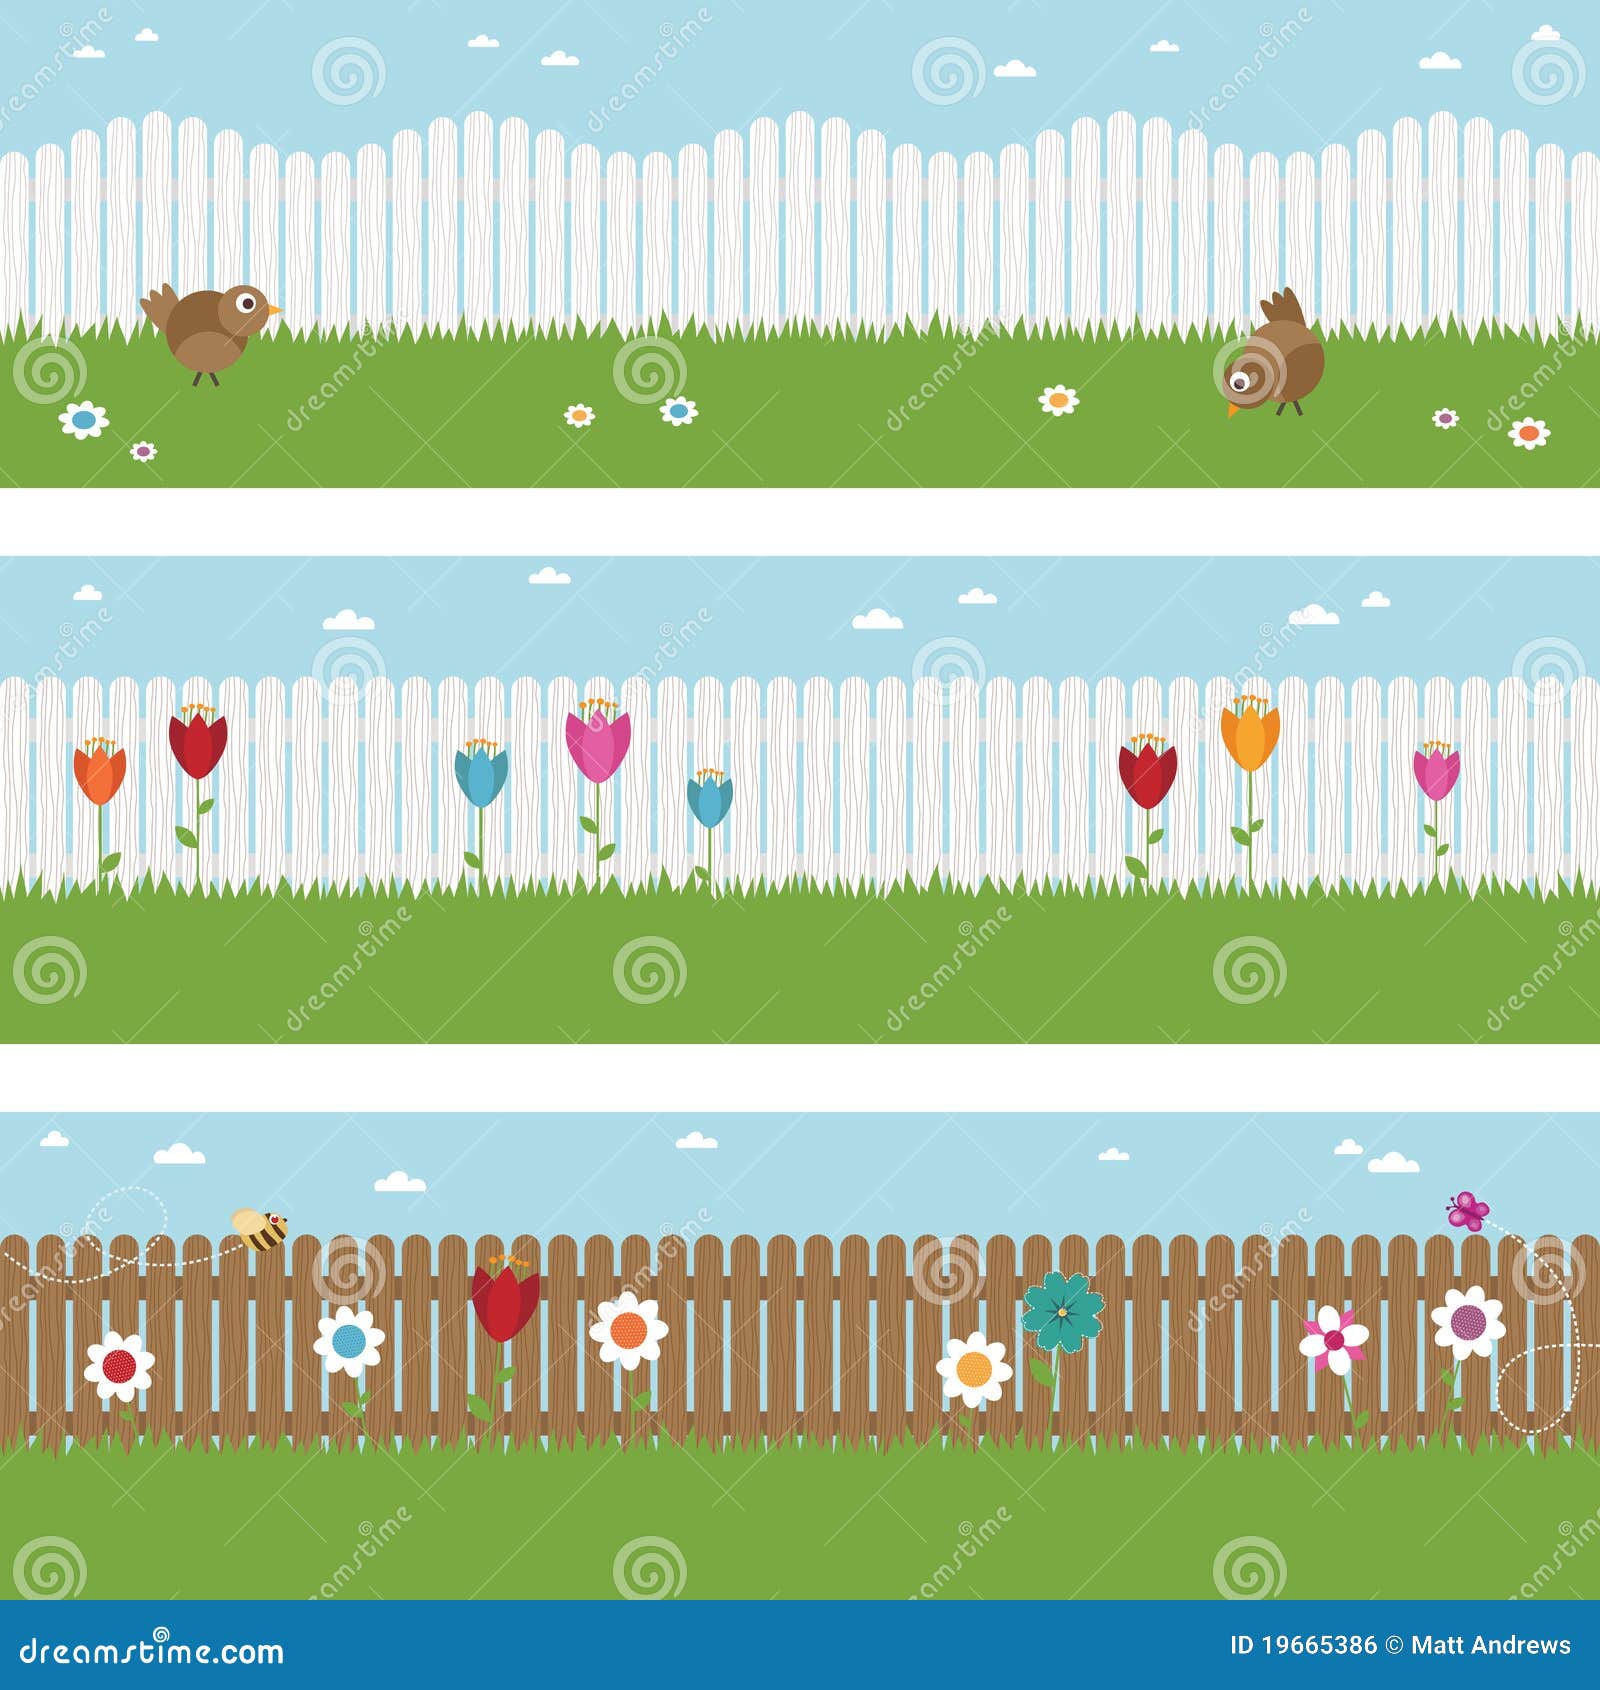 picket fence banners